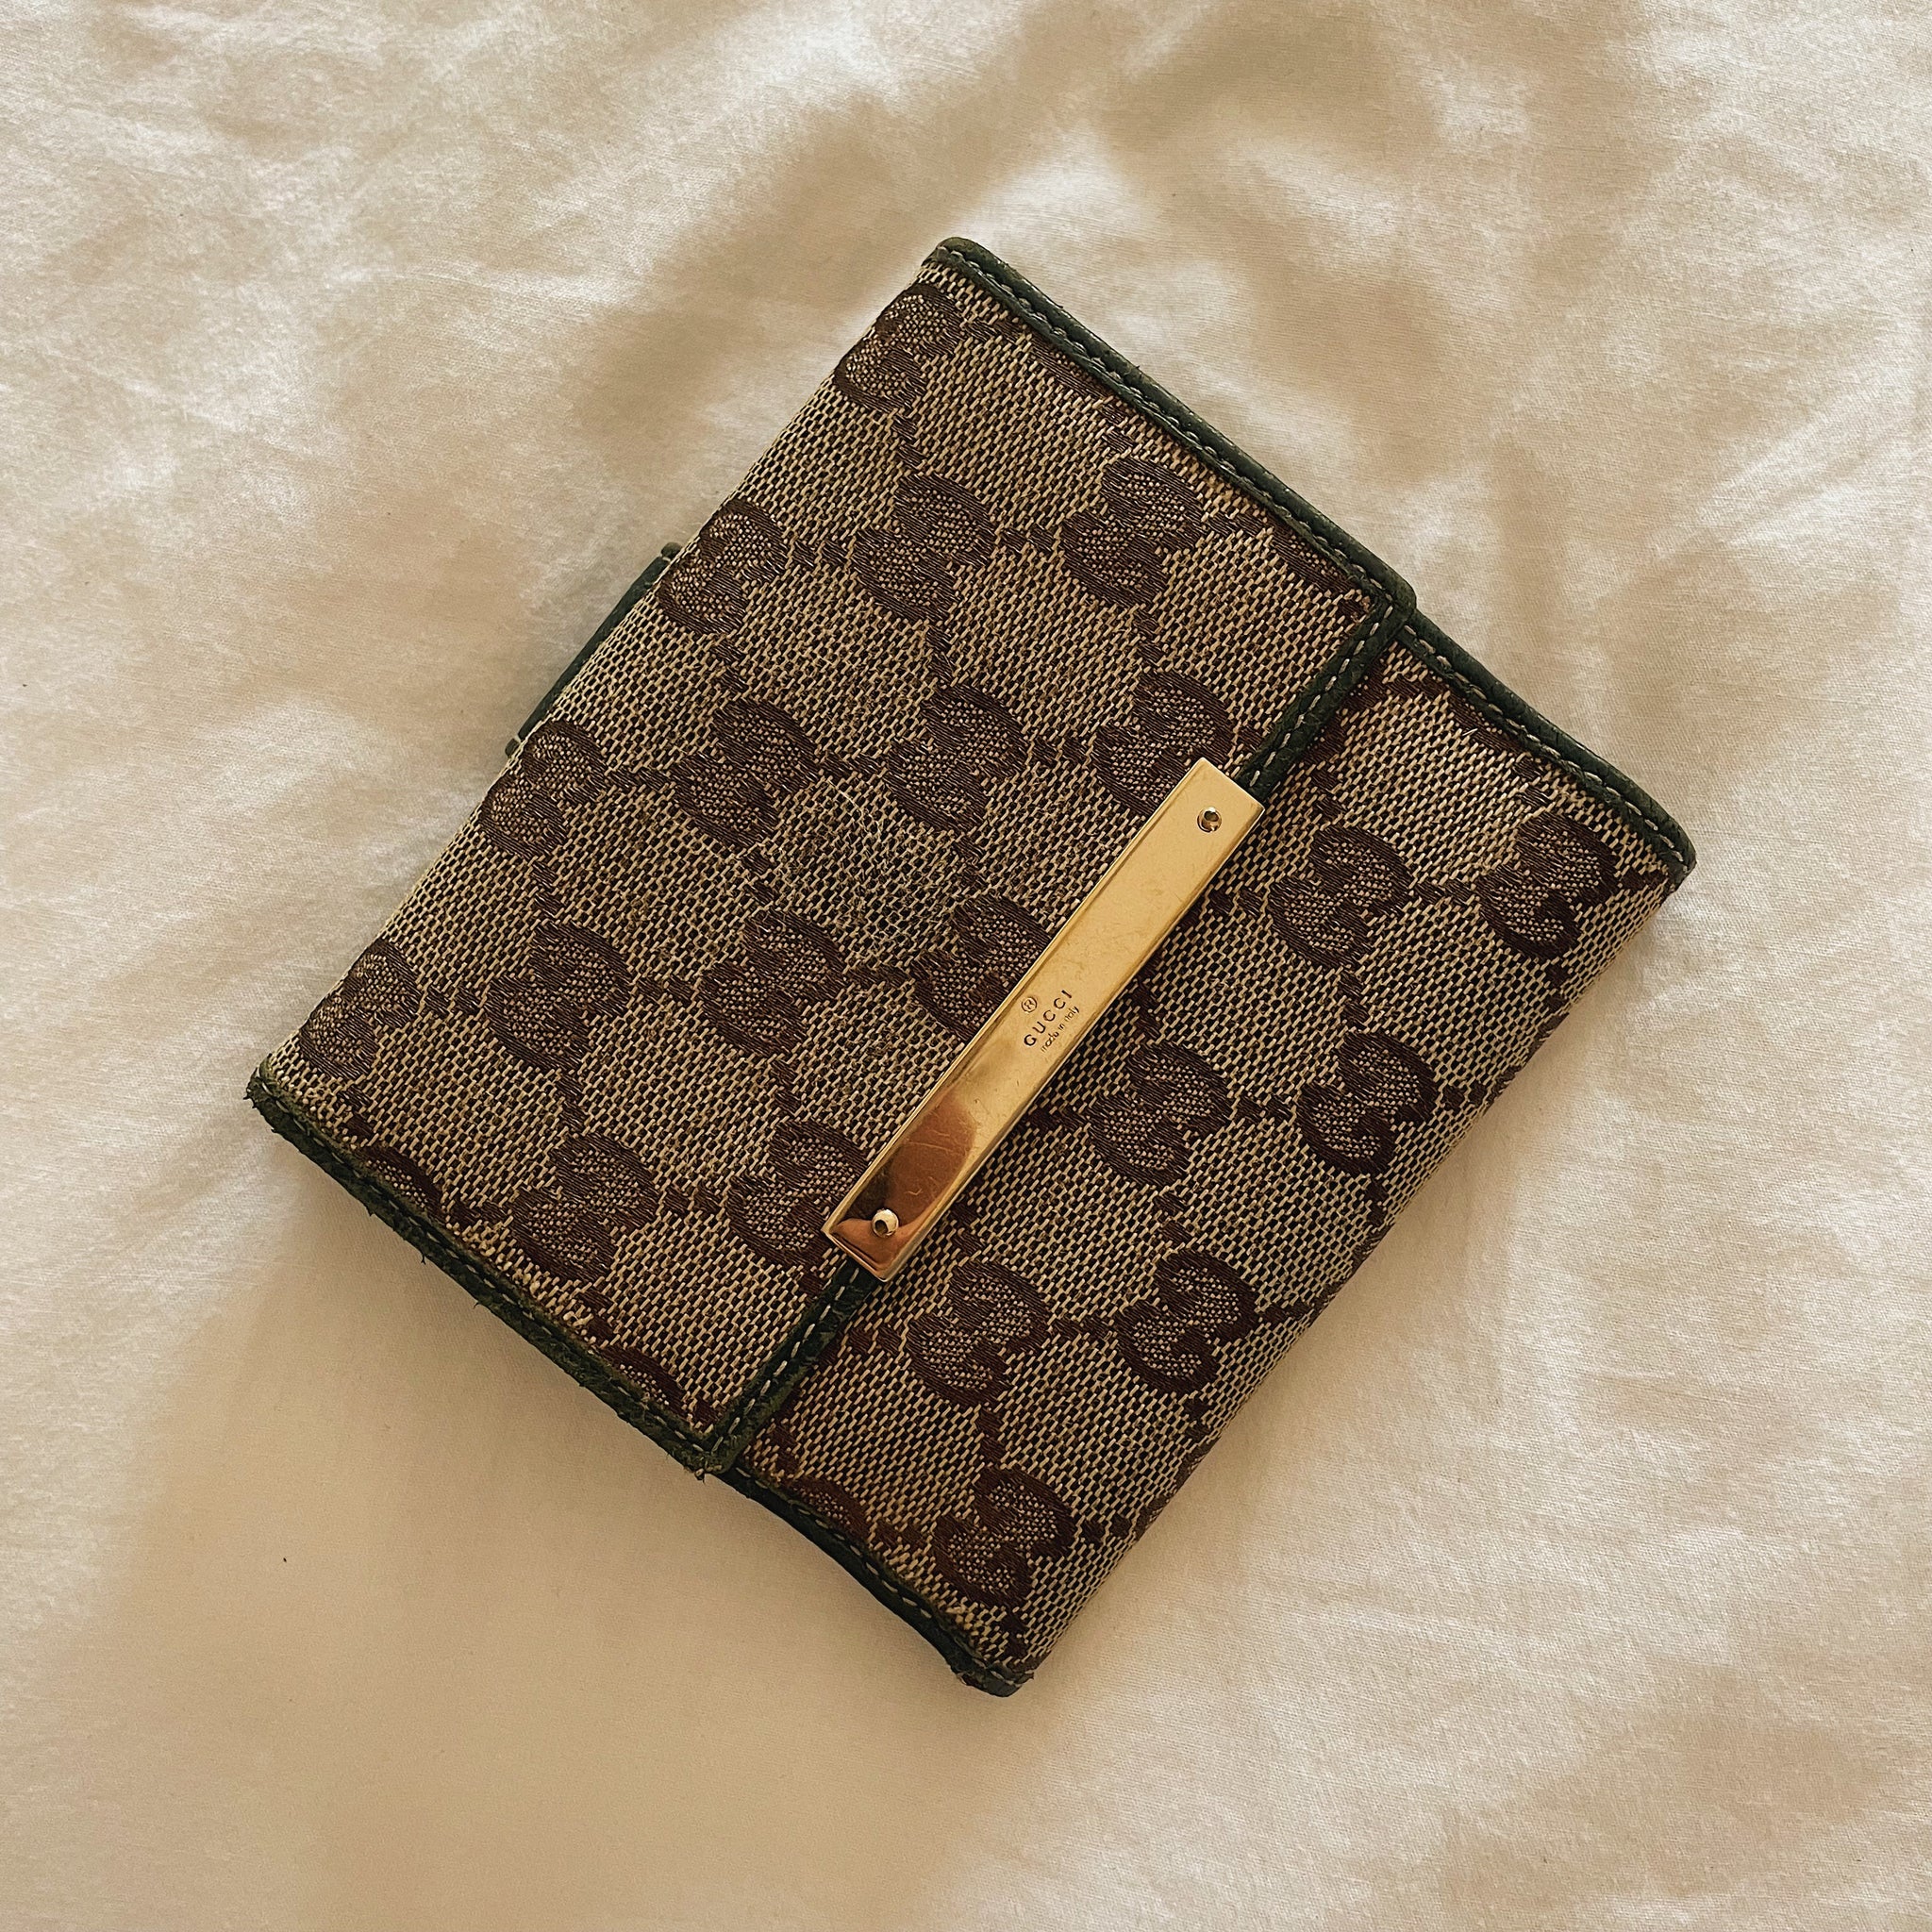 Authentic GUCCI Old Gucci Monogram Mens Wallet Folded GG Designer